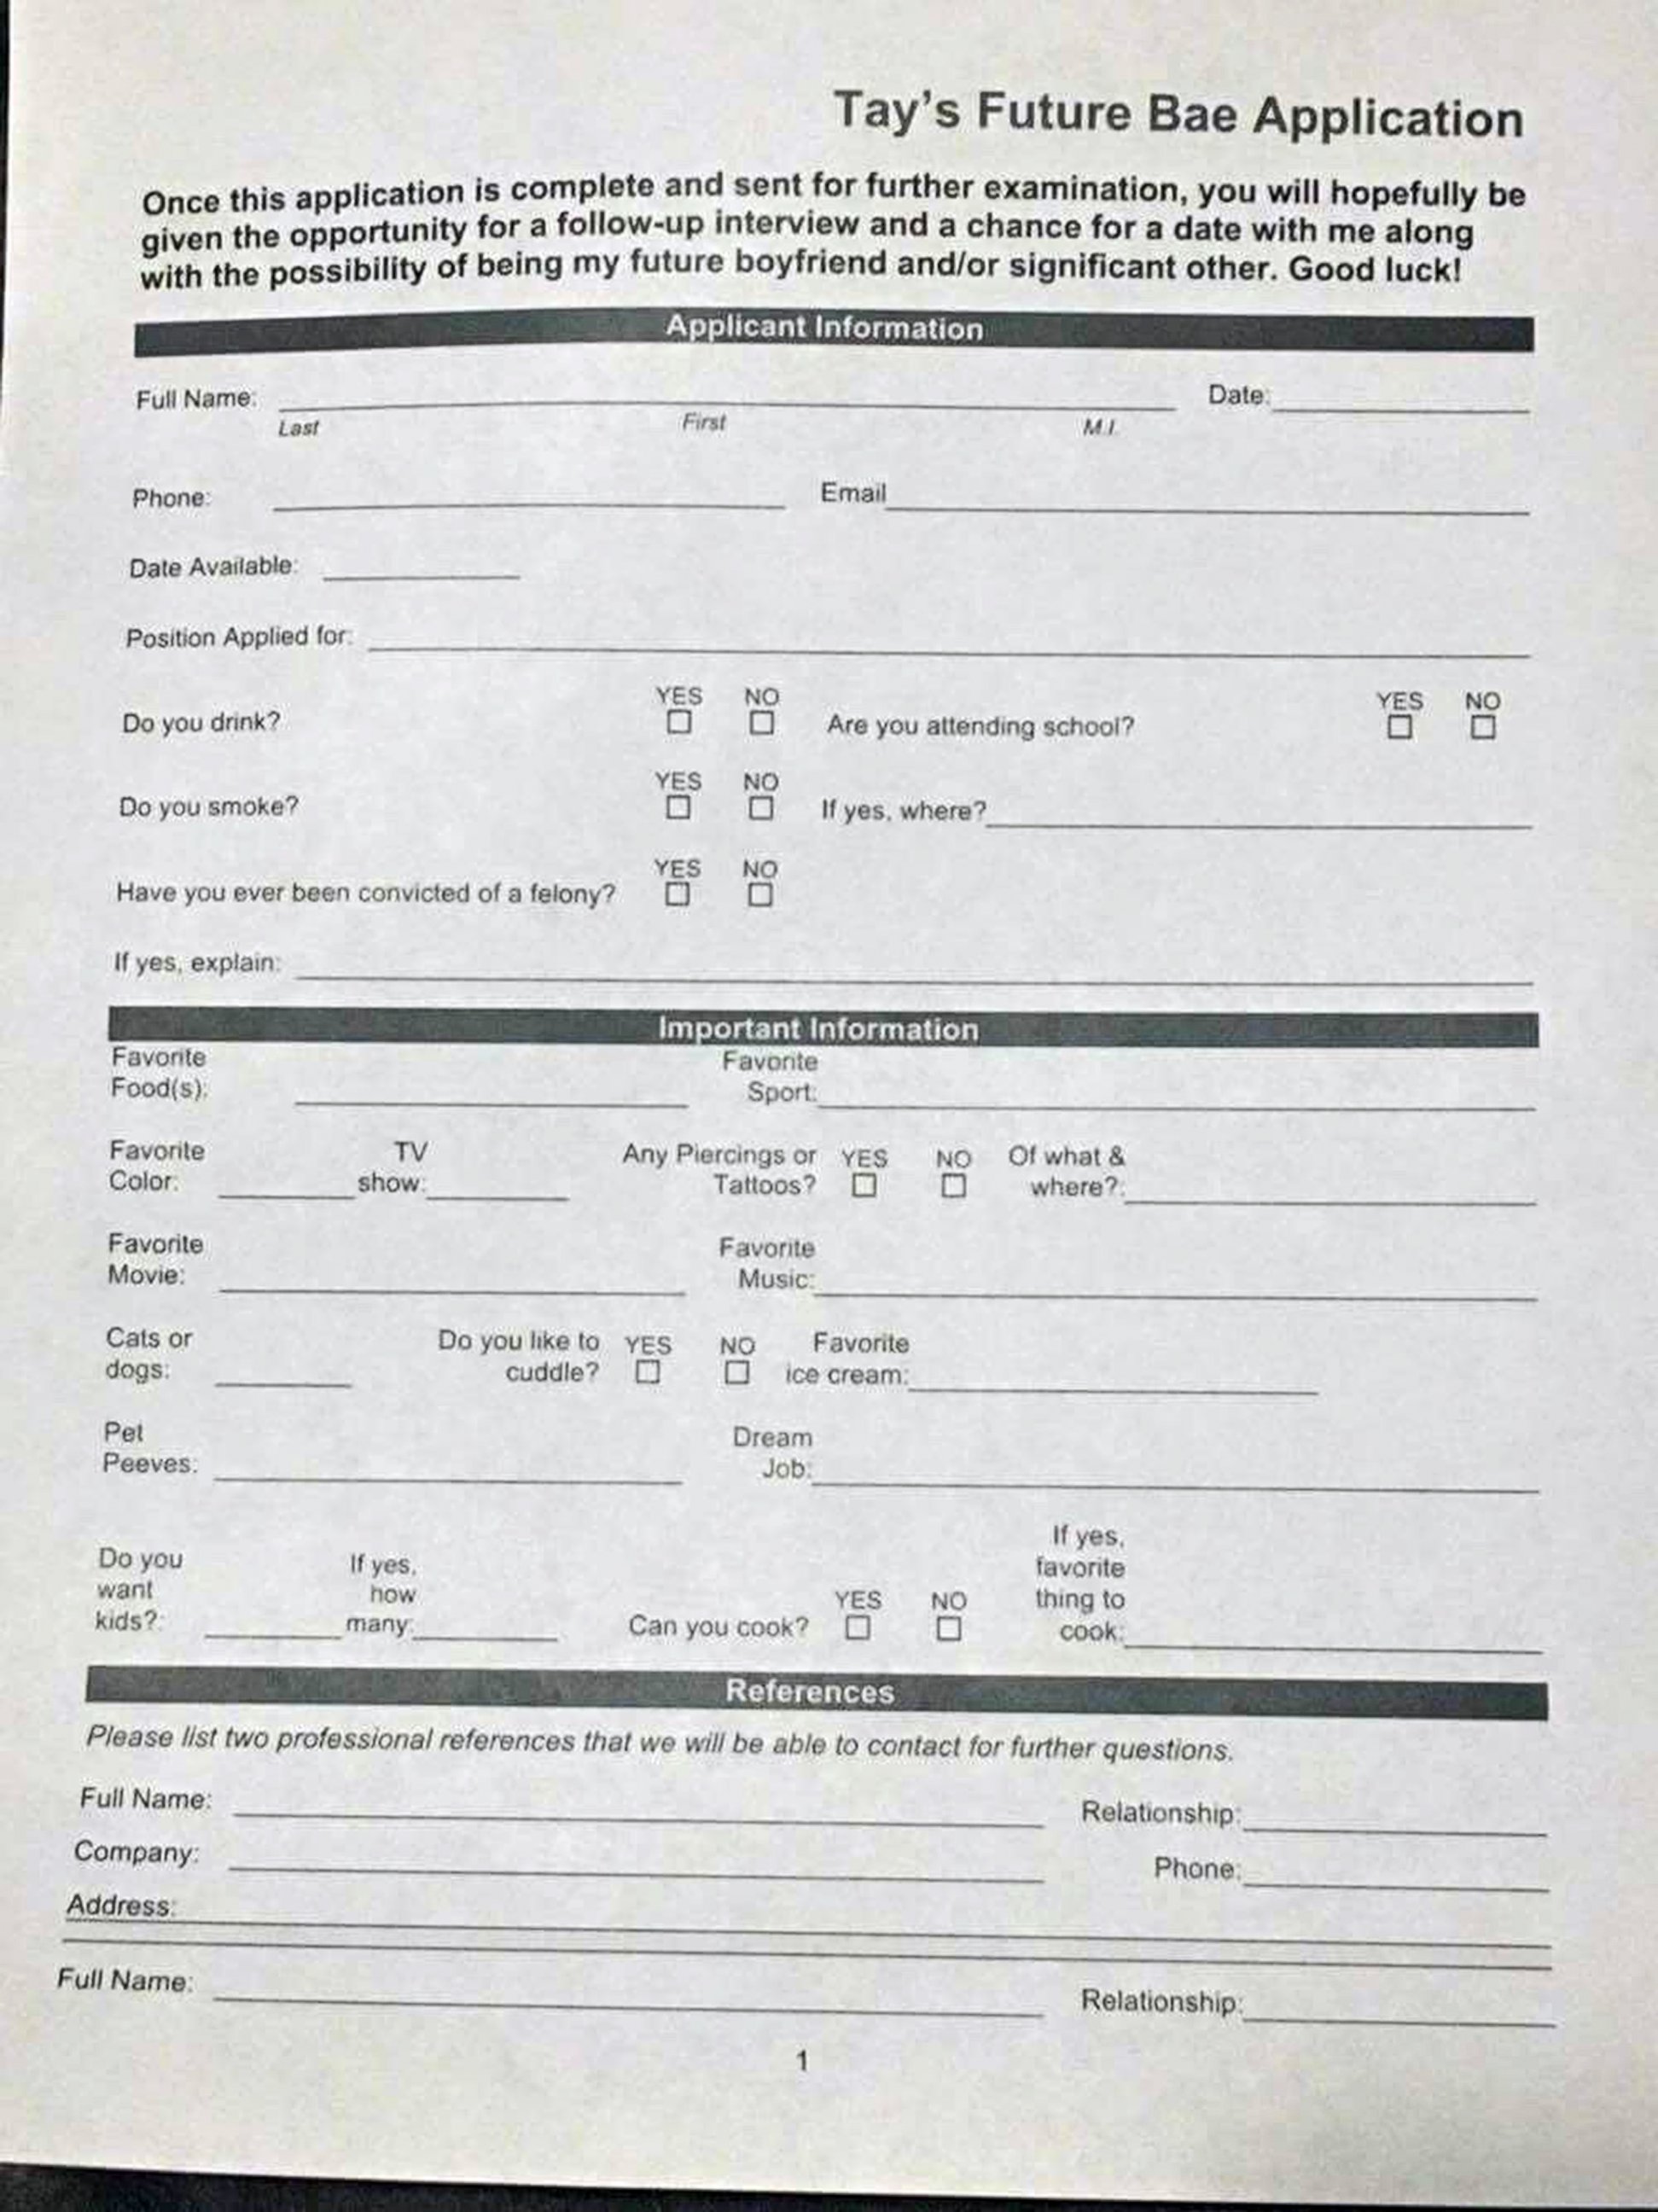 PHOTO: Taylor Sele created an in-depth "dating application" for a potential boyfriend. 